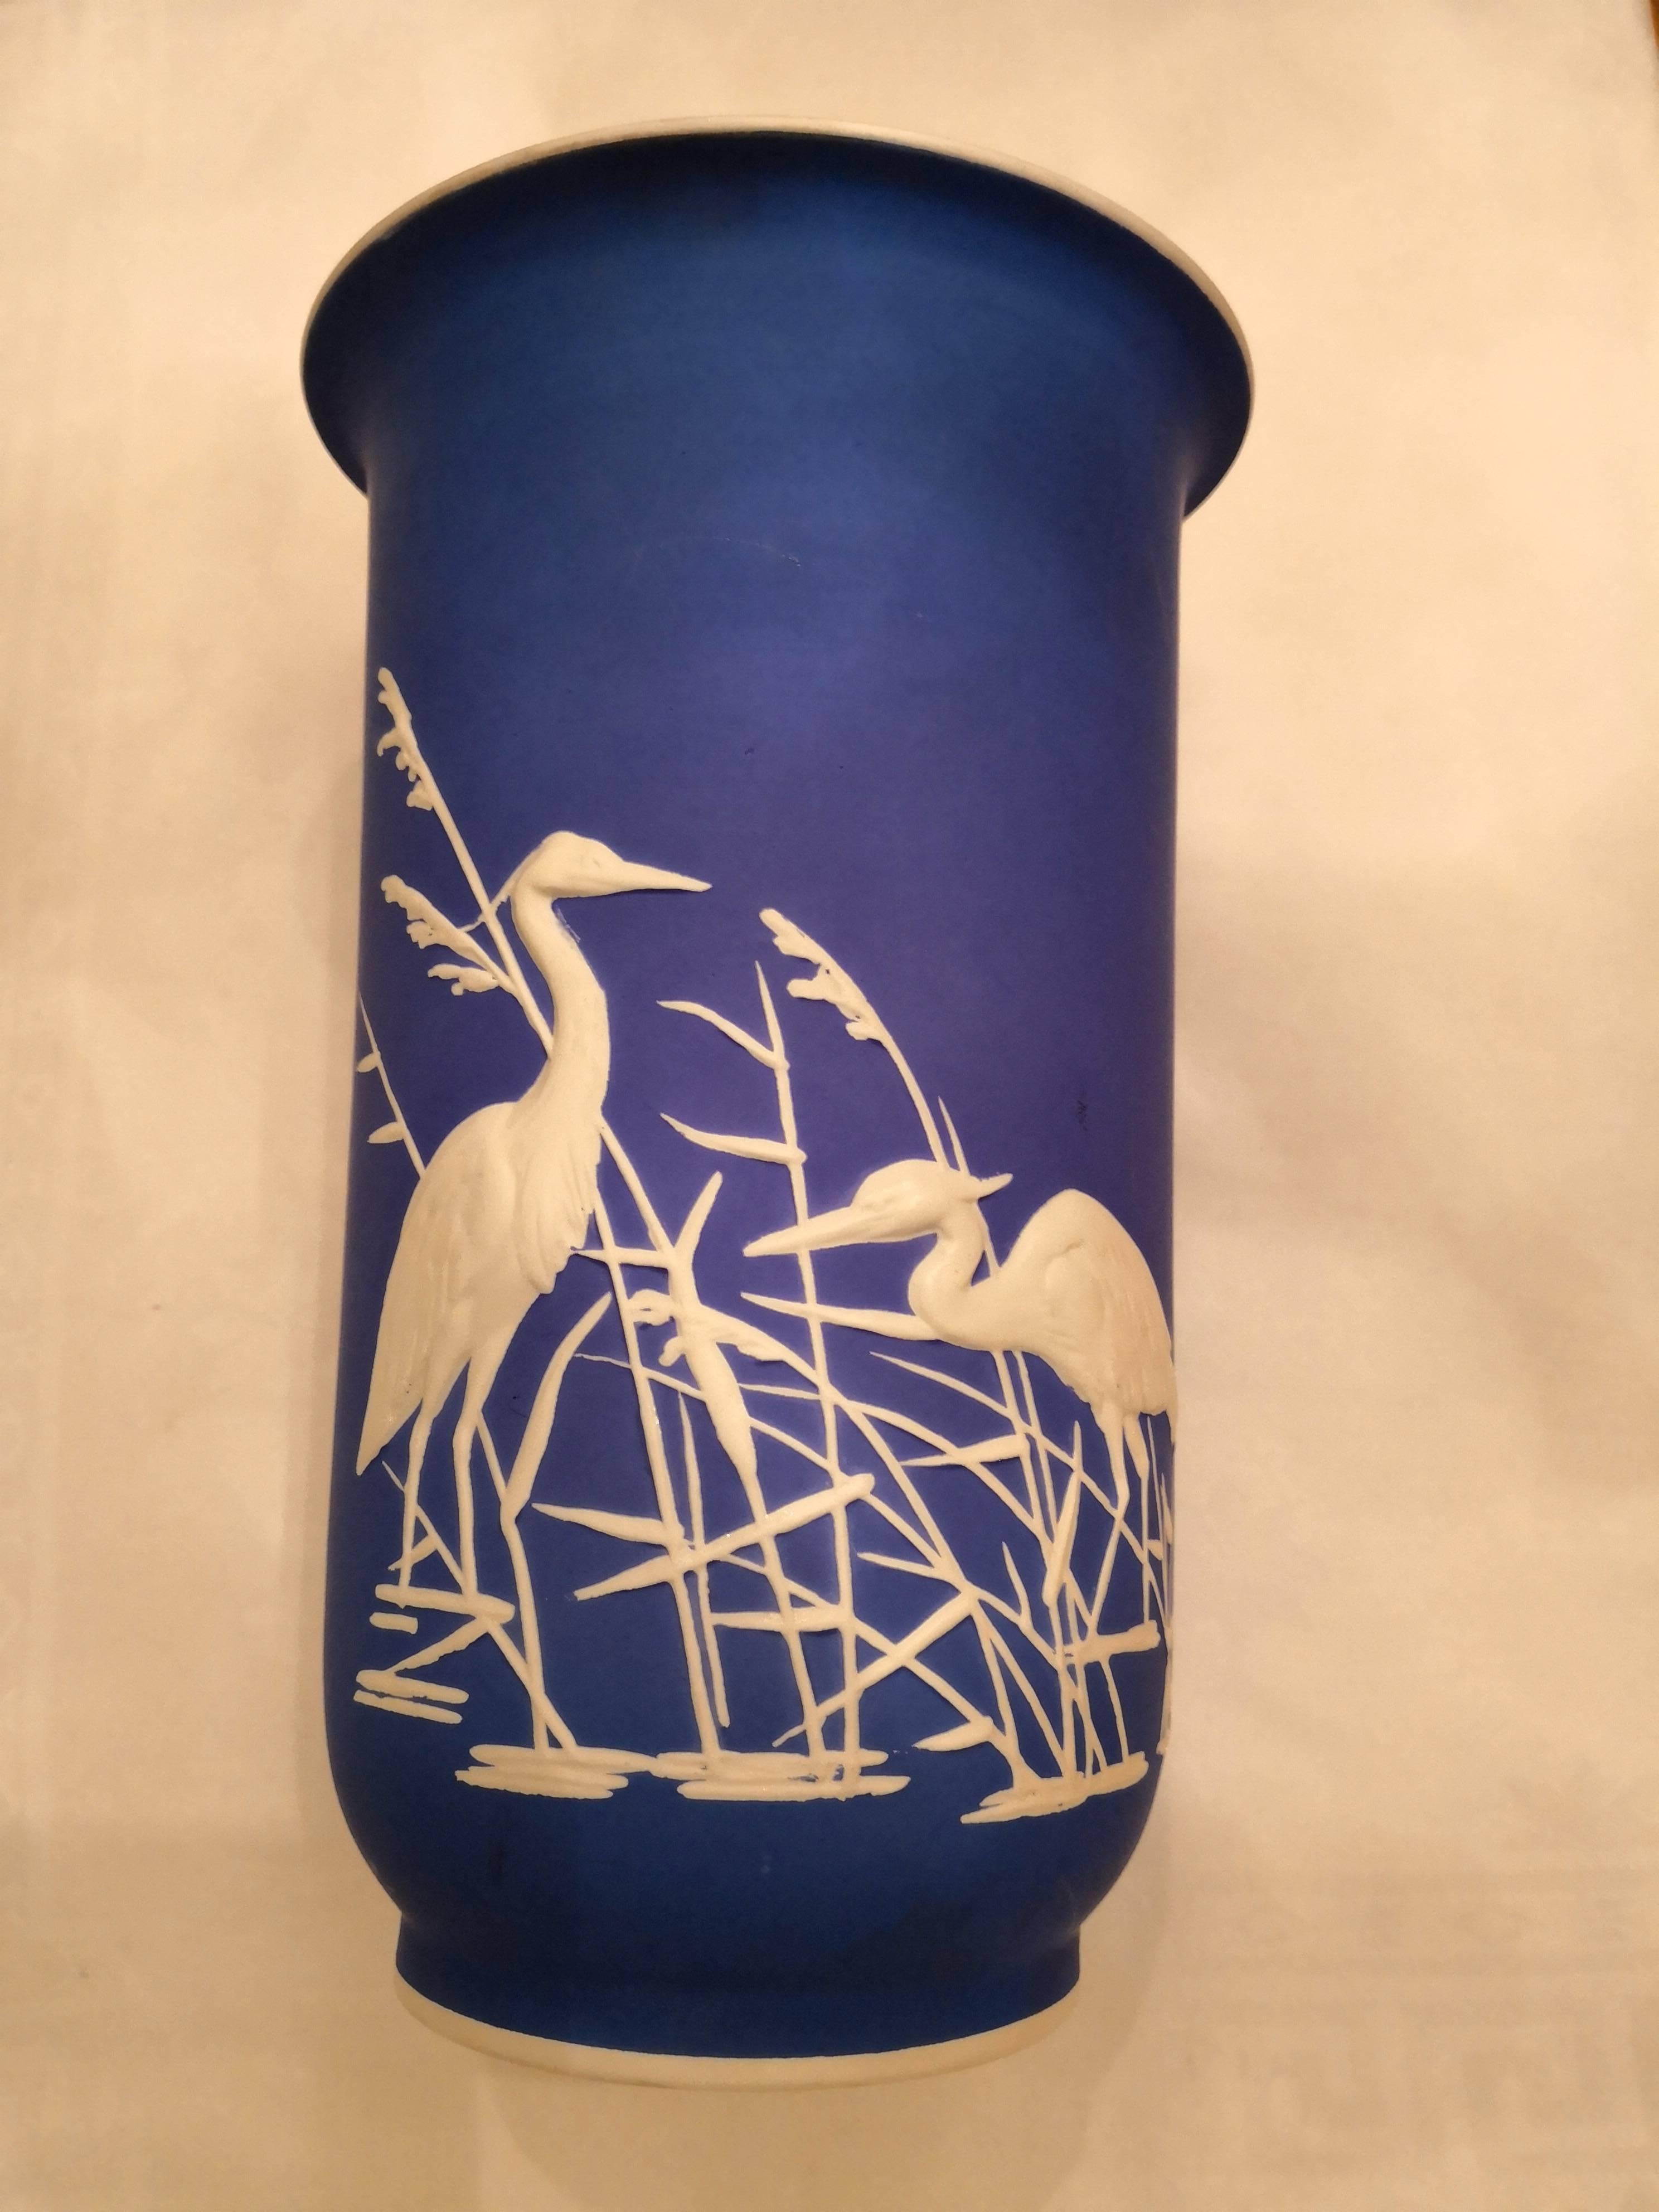 Straight vase from Rosenthal / Germany in bright cobalt blue with a decor in white. The decor shows a charmingscene with  sculptural crans and grasses in white. Outside unglazed porcelain and inside white glazed. On the bottom full hallmark from